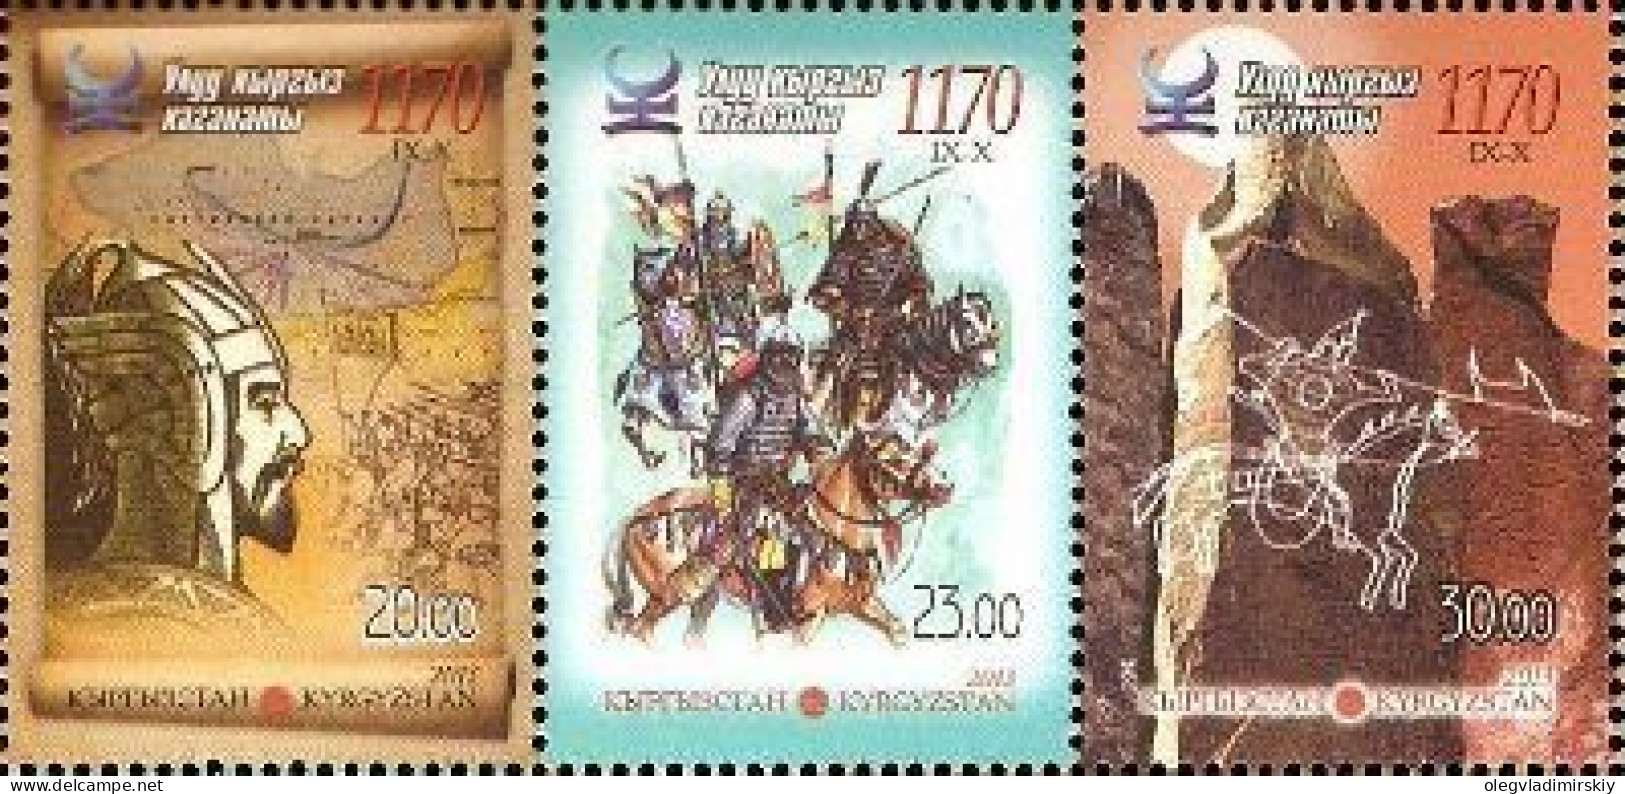 Kyrgyzstan 2013 Great Kyrgyz Kaganate 1170 Years Set Of 3 Stamps In Strip MNH - Archäologie